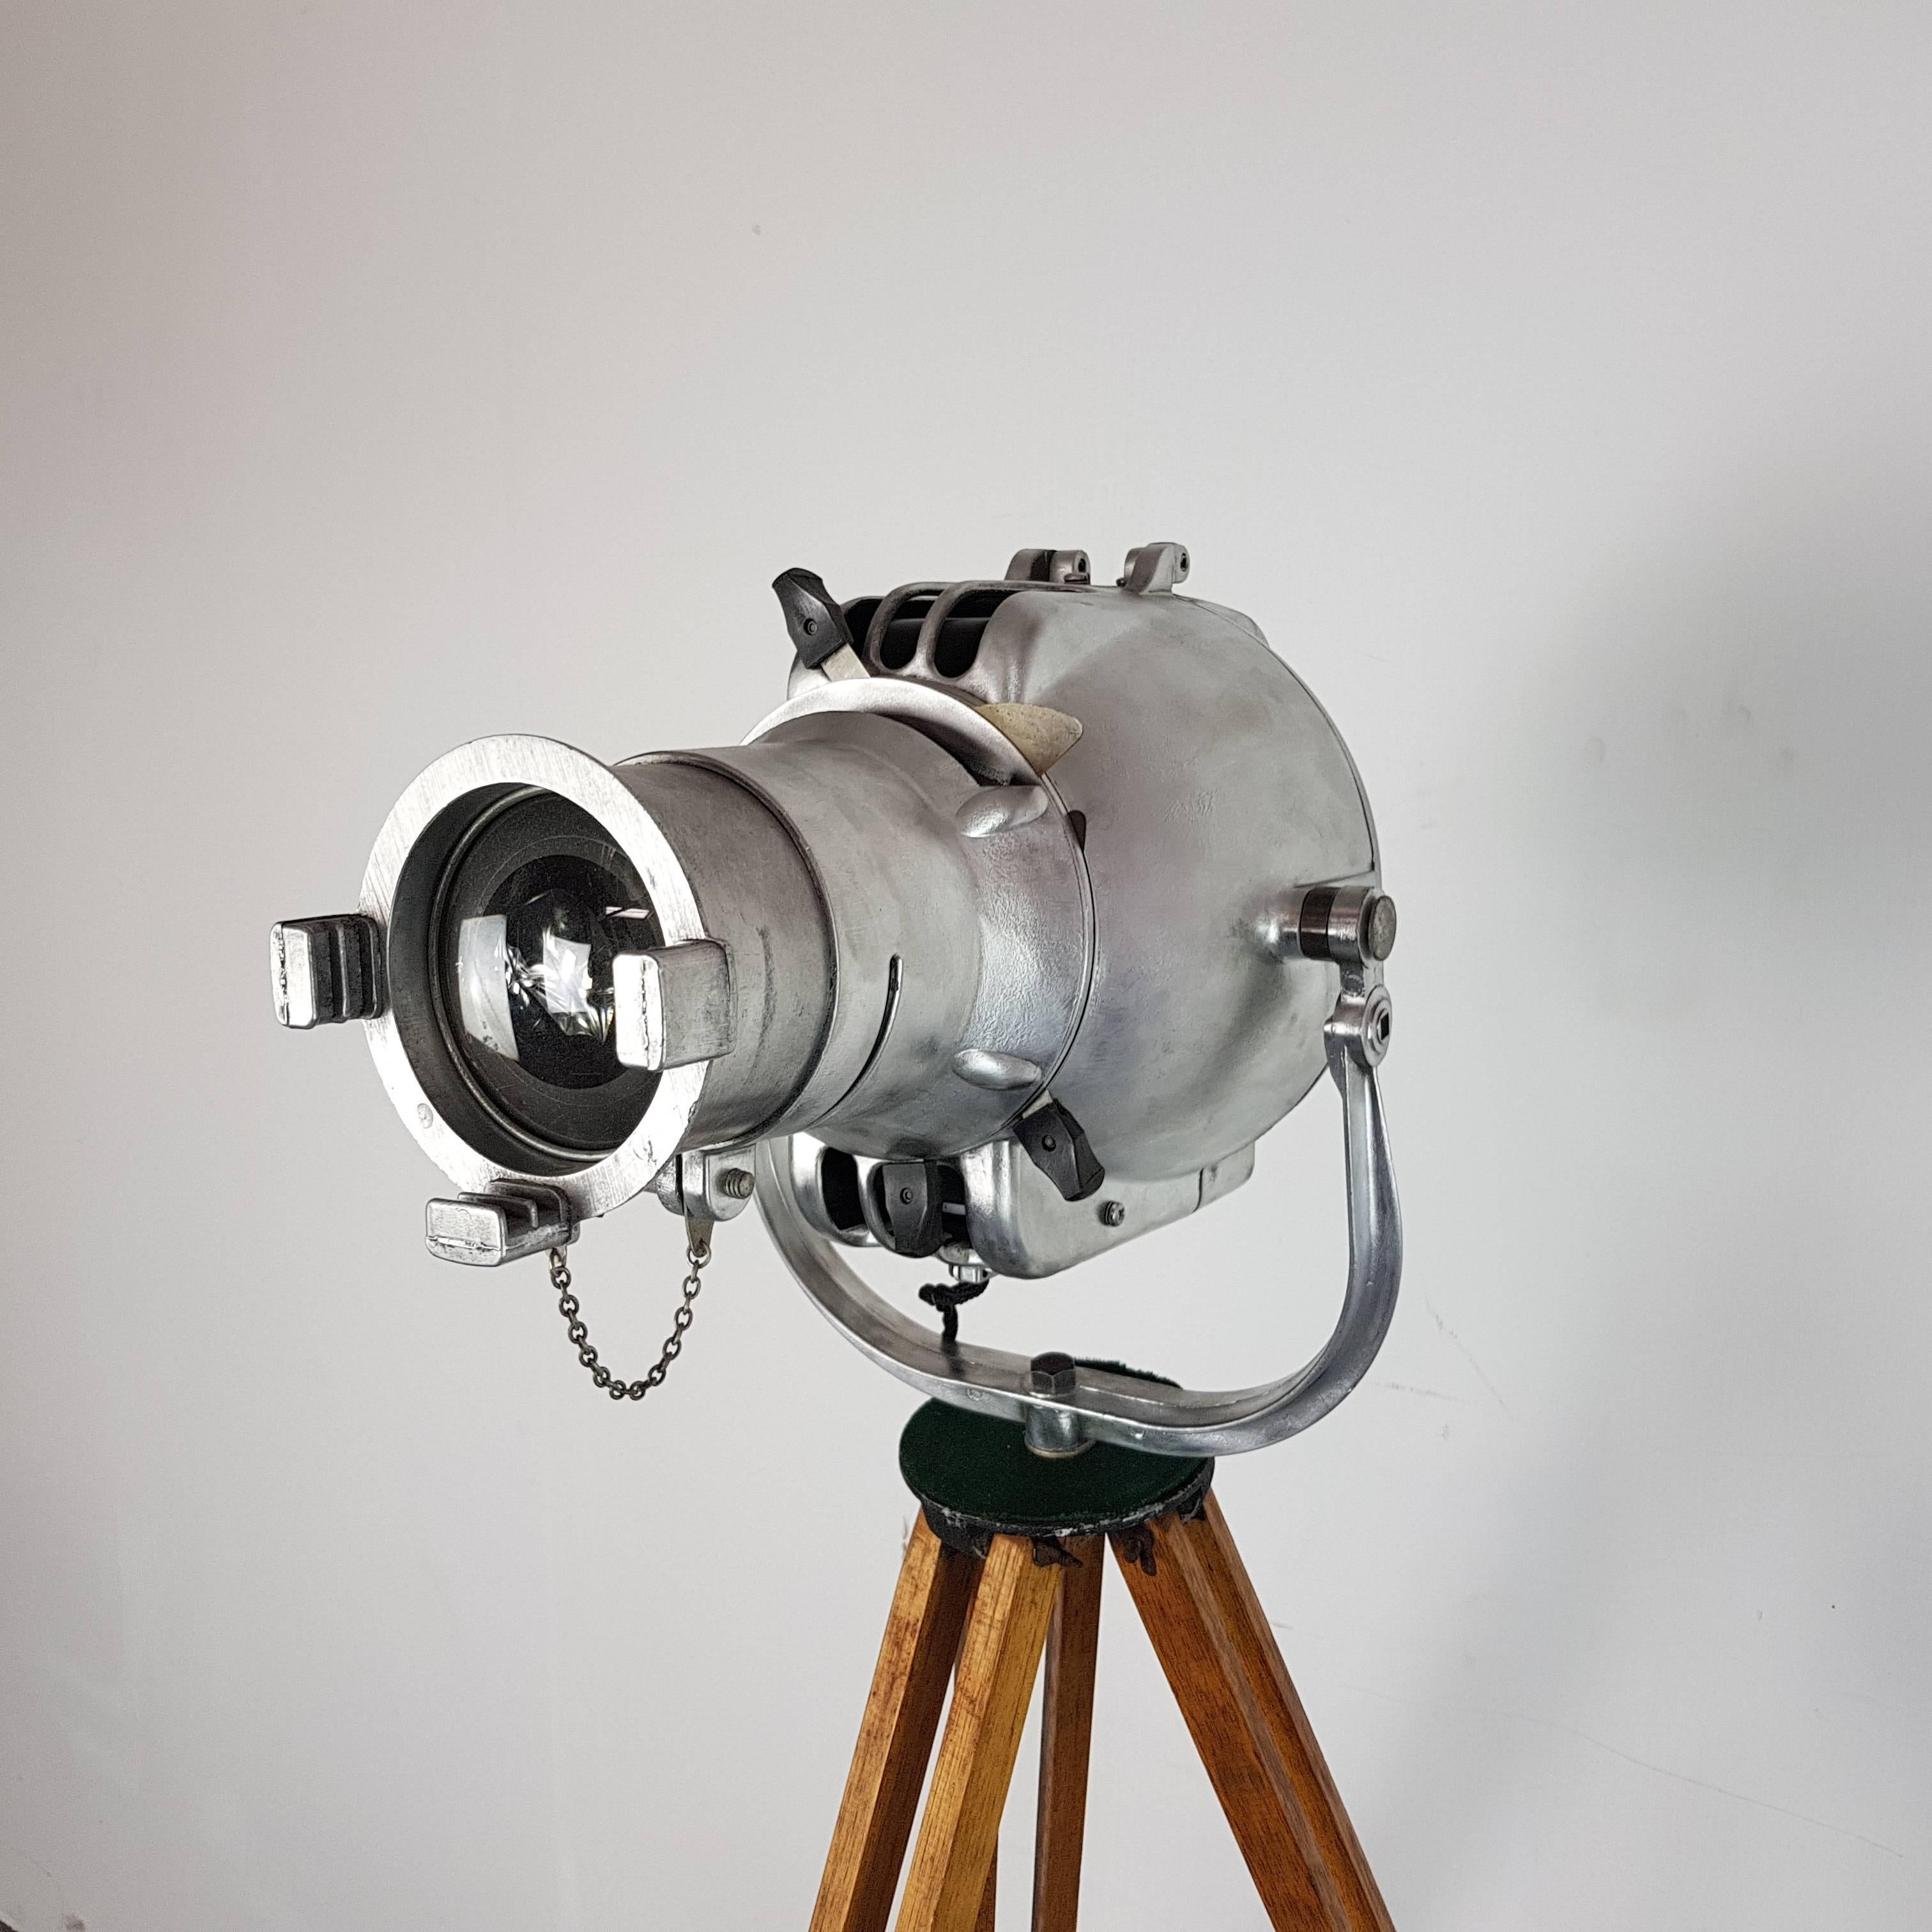 English 1960s Stripped and Polished Strand 23 Theatre Light on Vintage Wooden Tripod For Sale